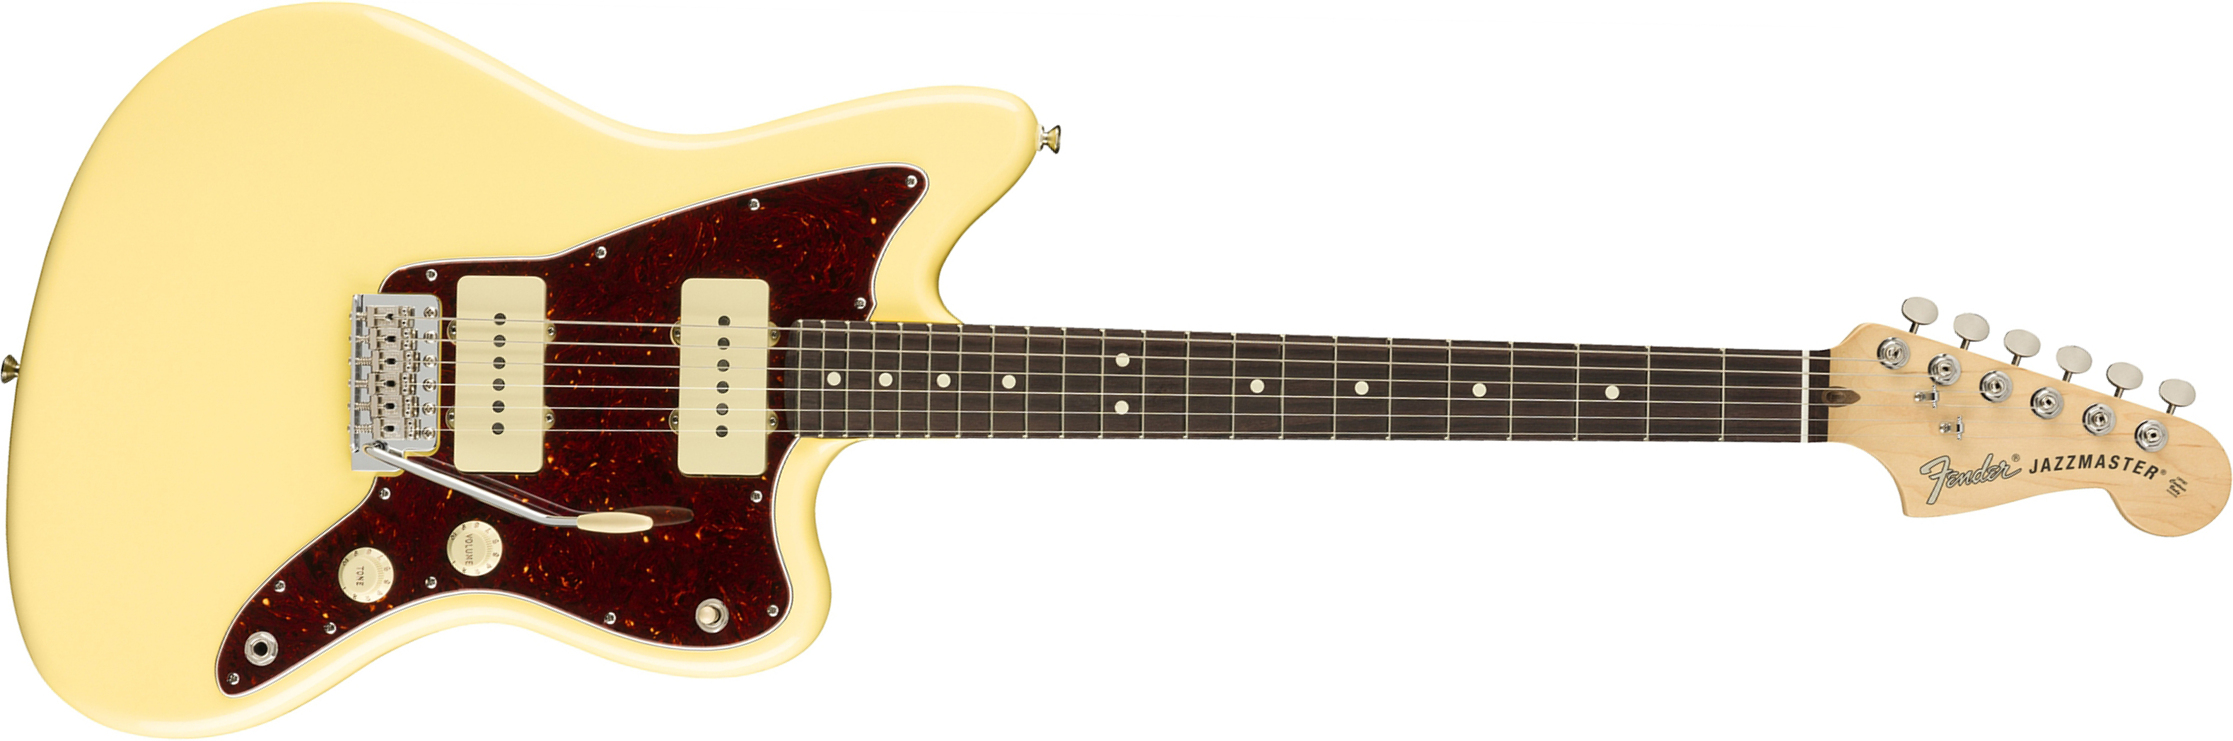 Fender Jazzmaster American Performer Usa Ss Rw - Vintage White - Double Cut E-Gitarre - Main picture